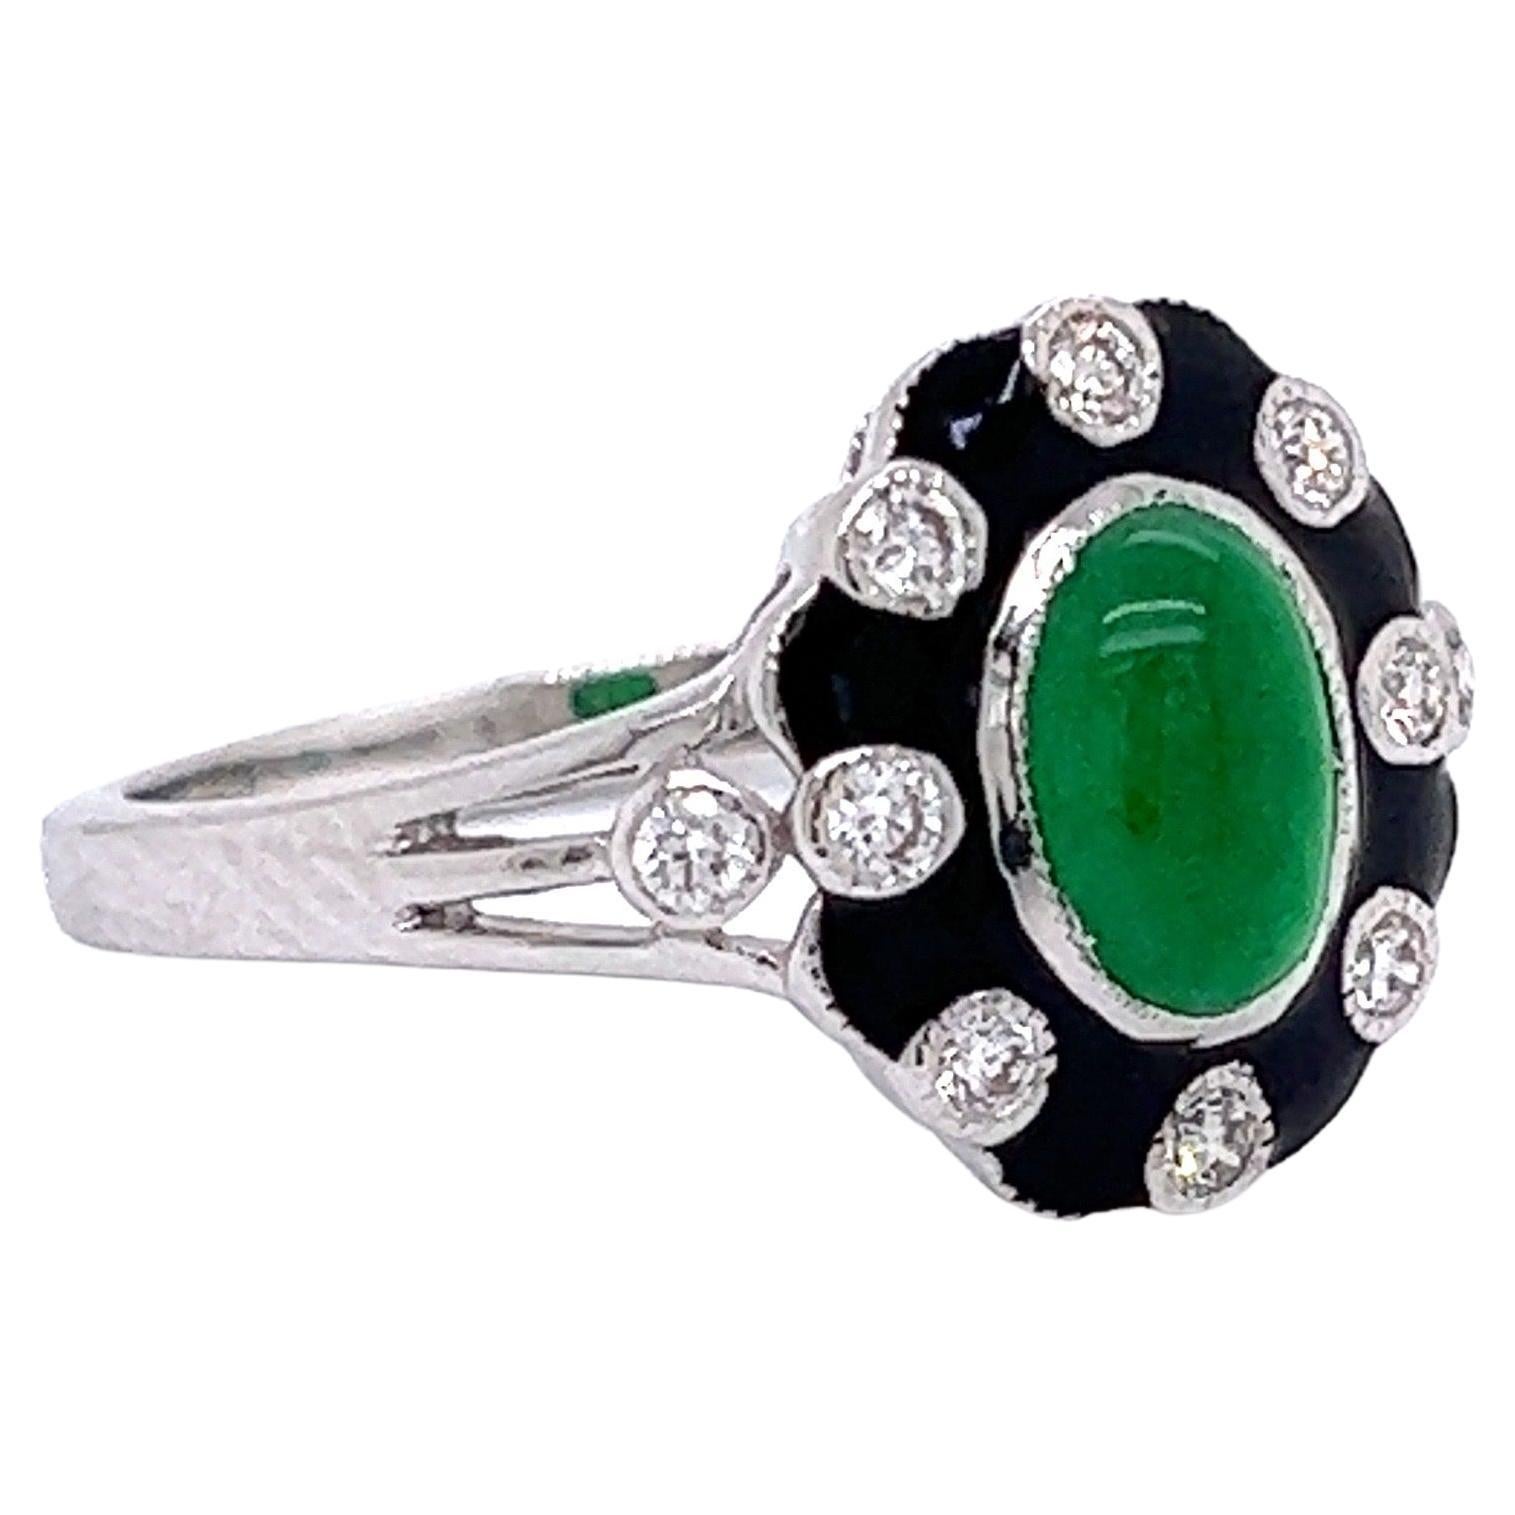 A TB Exclusive! At the center of this ring is 0.80 carats of jade, surrounded by 0.17 carats of brilliant round diamonds and black enamel. All of the stones are set in 2.97 grams of 14k white gold. You will turn heads with this unique ring!

Metal